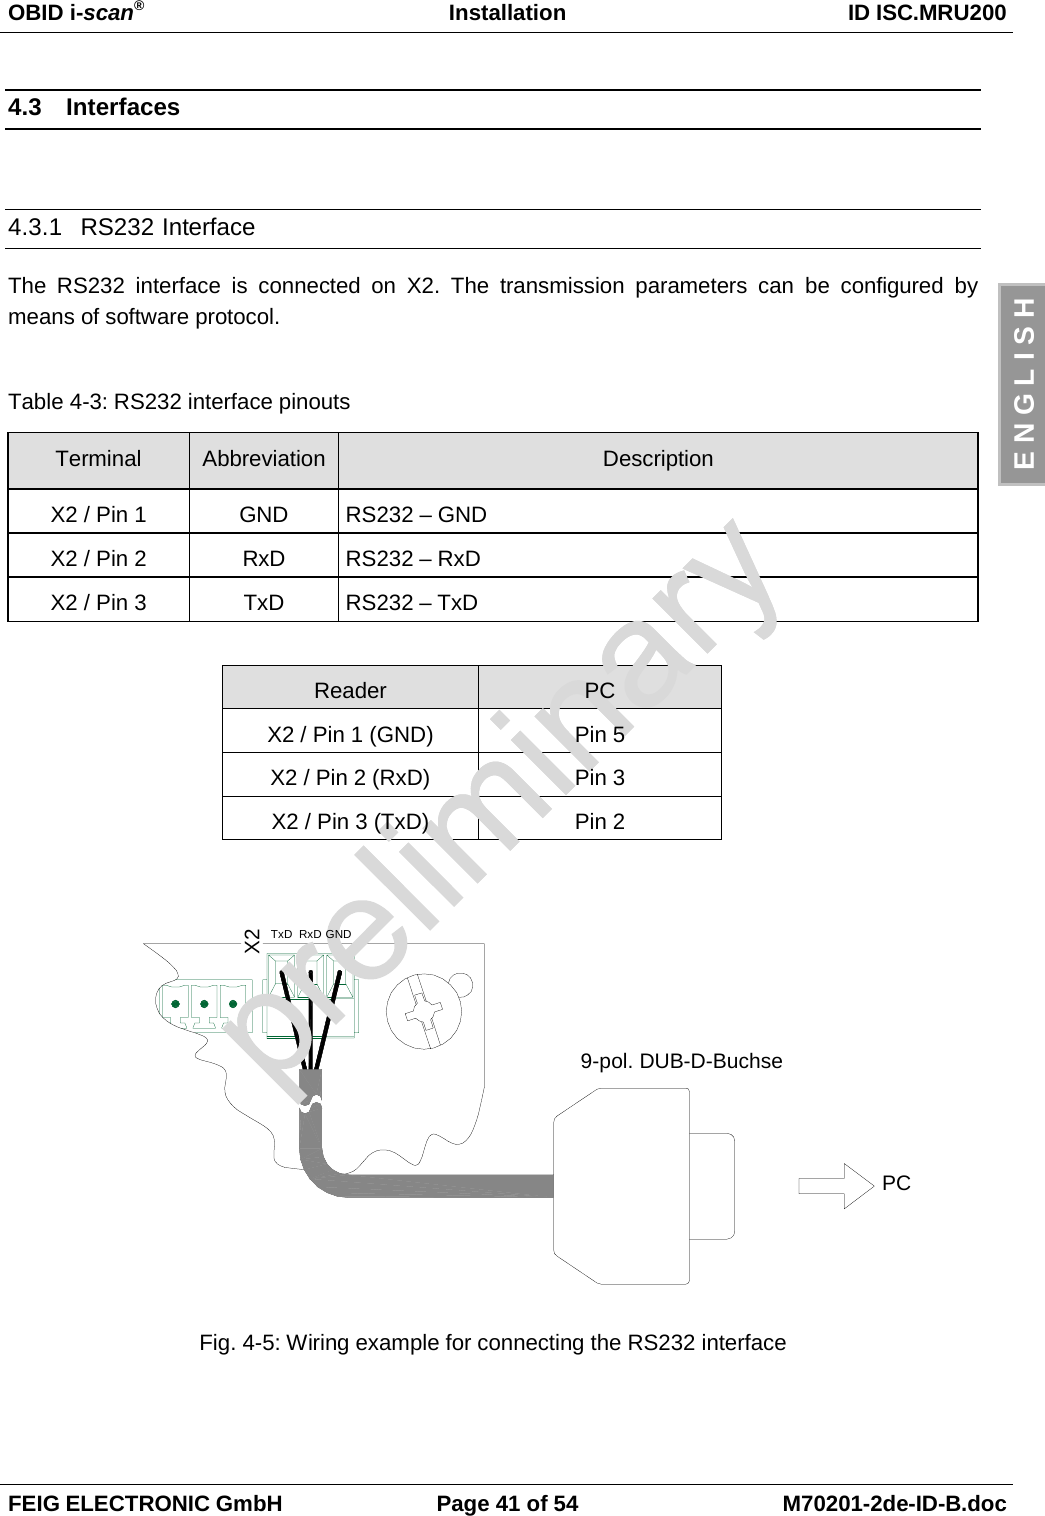 OBID i-scan®Installation ID ISC.MRU200FEIG ELECTRONIC GmbH Page 41 of 54 M70201-2de-ID-B.docE N G L I S H4.3 Interfaces4.3.1 RS232 InterfaceThe RS232 interface is connected on X2. The transmission parameters can be configured bymeans of software protocol.Table 4-3: RS232 interface pinoutsTerminal Abbreviation DescriptionX2 / Pin 1 GND RS232 – GNDX2 / Pin 2 RxD RS232 – RxDX2 / Pin 3 TxD RS232 – TxDReader PCX2 / Pin 1 (GND) Pin 5X2 / Pin 2 (RxD) Pin 3X2 / Pin 3 (TxD) Pin 2Fig. 4-5: Wiring example for connecting the RS232 interfaceX2TxD RxD GNDPC9-pol. DUB-D-Buchse